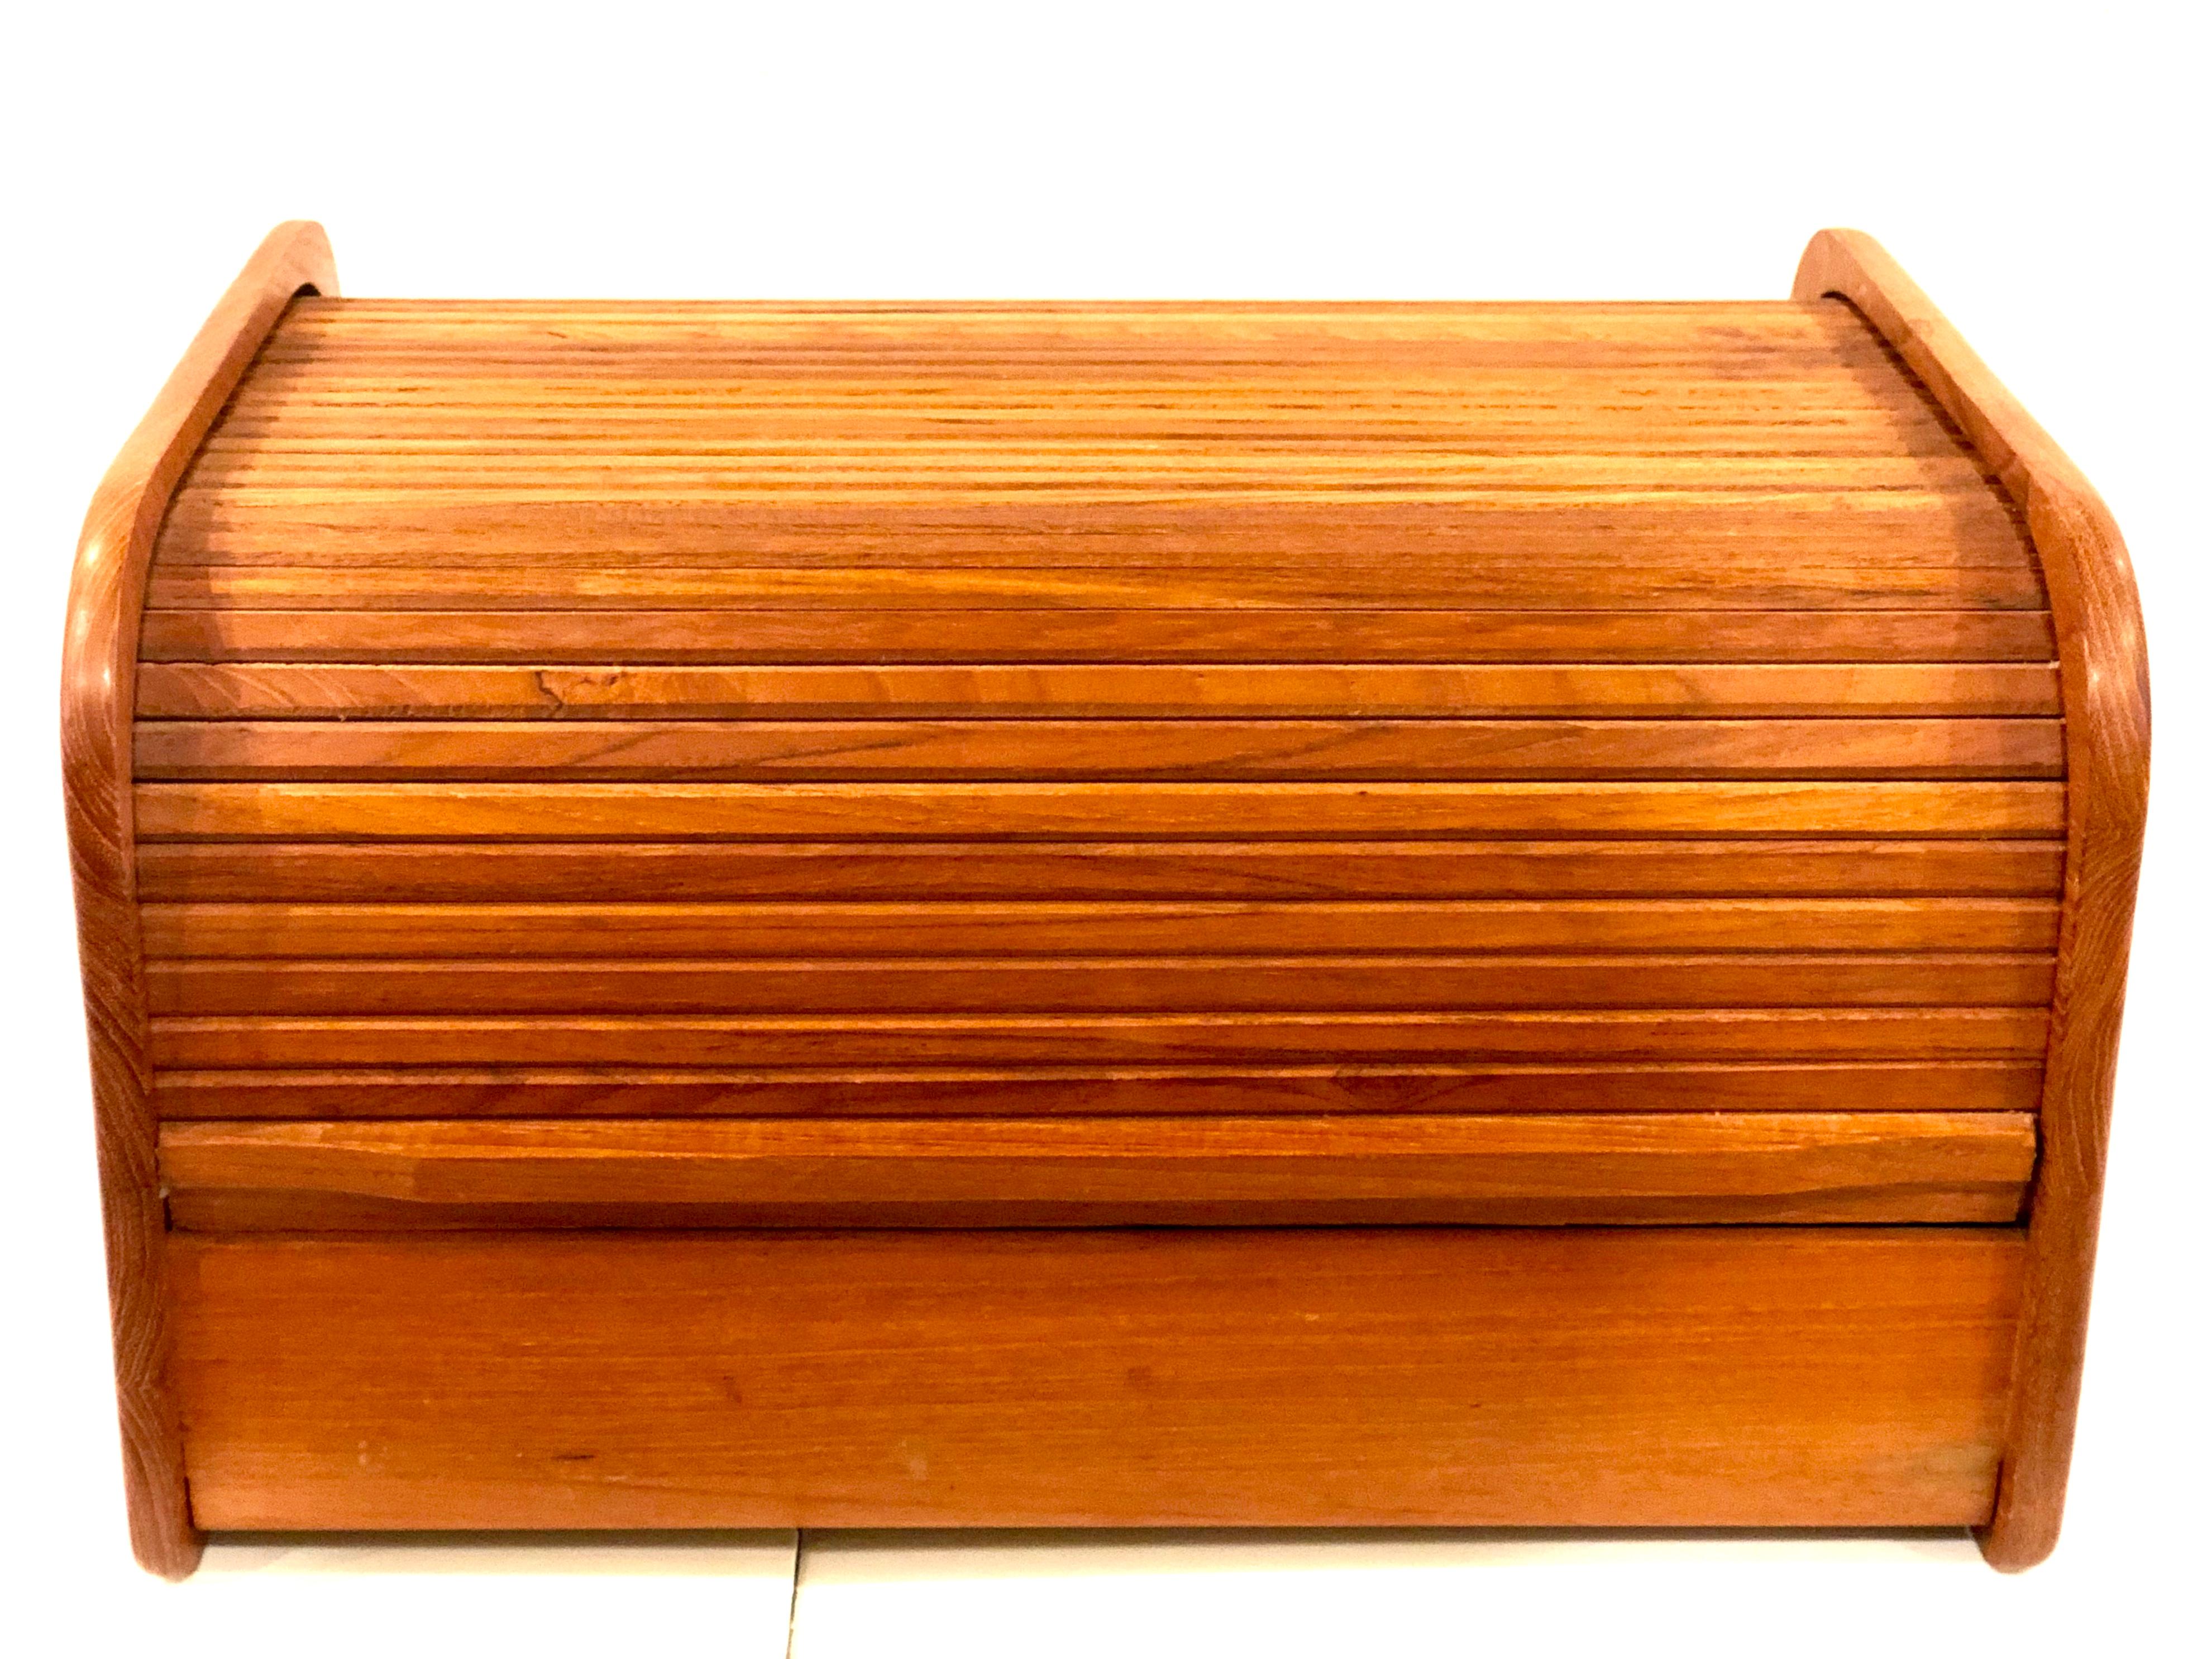 Danish modern solid teak tambour door trinket box, beautiful well crafted box desk top great for small storage. With roll top.